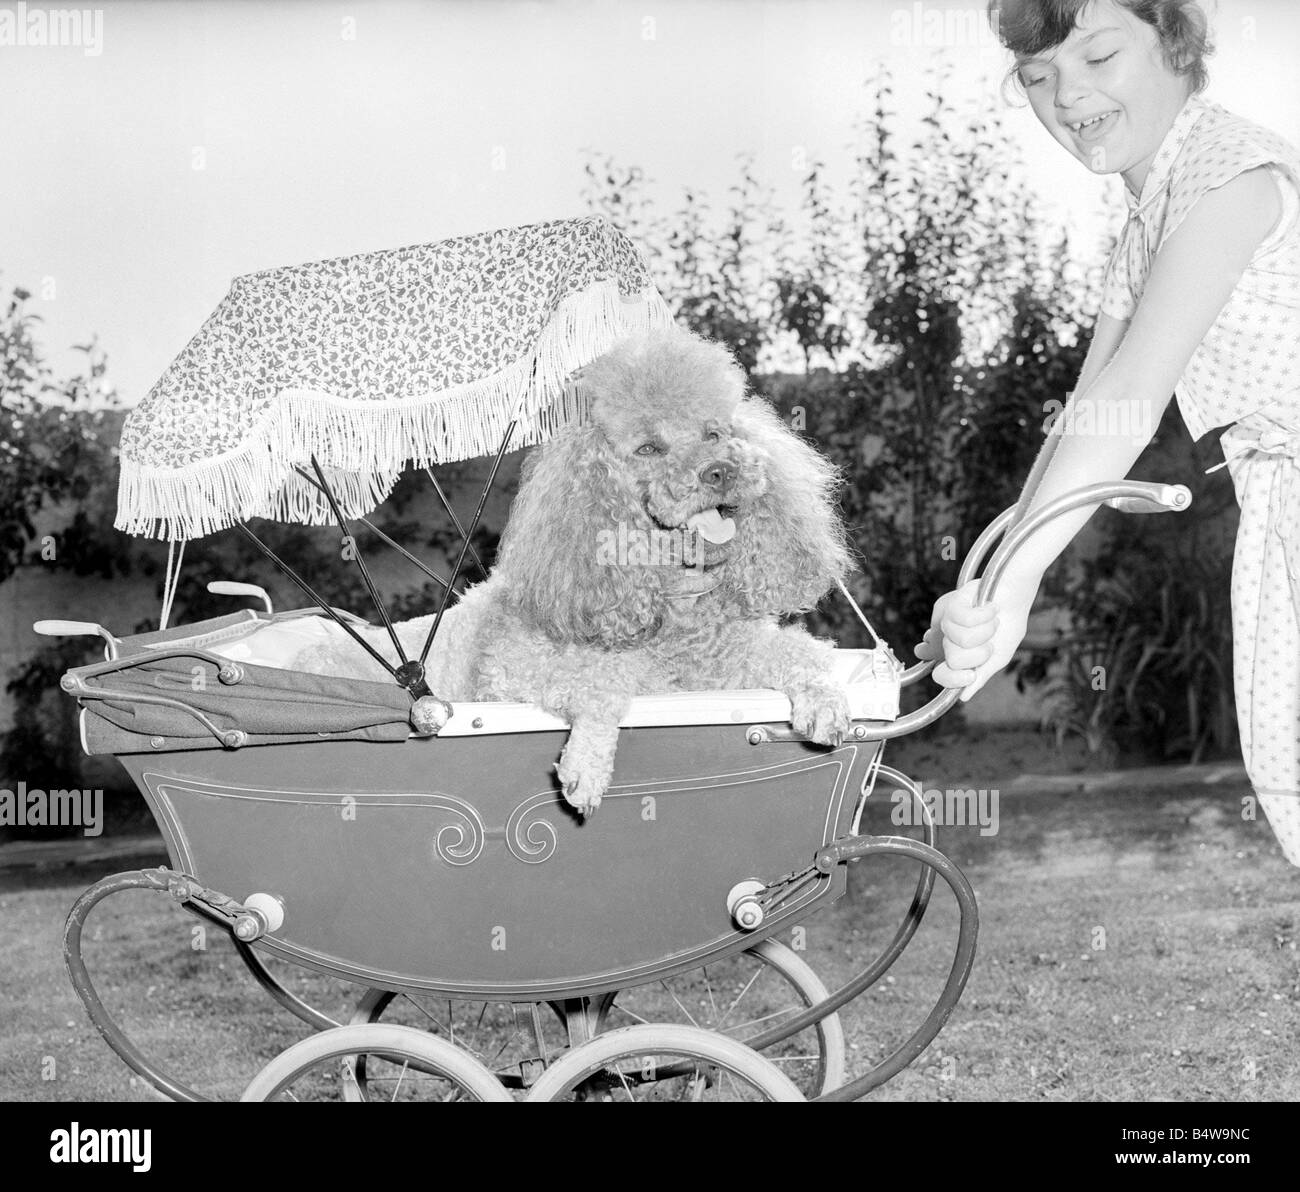 Poodle in pram July 1955 Mischa the French Poodle is pished around in a doll s pram by a little girl whilst on holiday in Plymouth Devon Bored tired sleepy dog yawning smiling under parasol in the summer with her teeth showing Child smiling laughing having fun pushing the pram 1950s animal dog humour mirrorpix Stock Photo